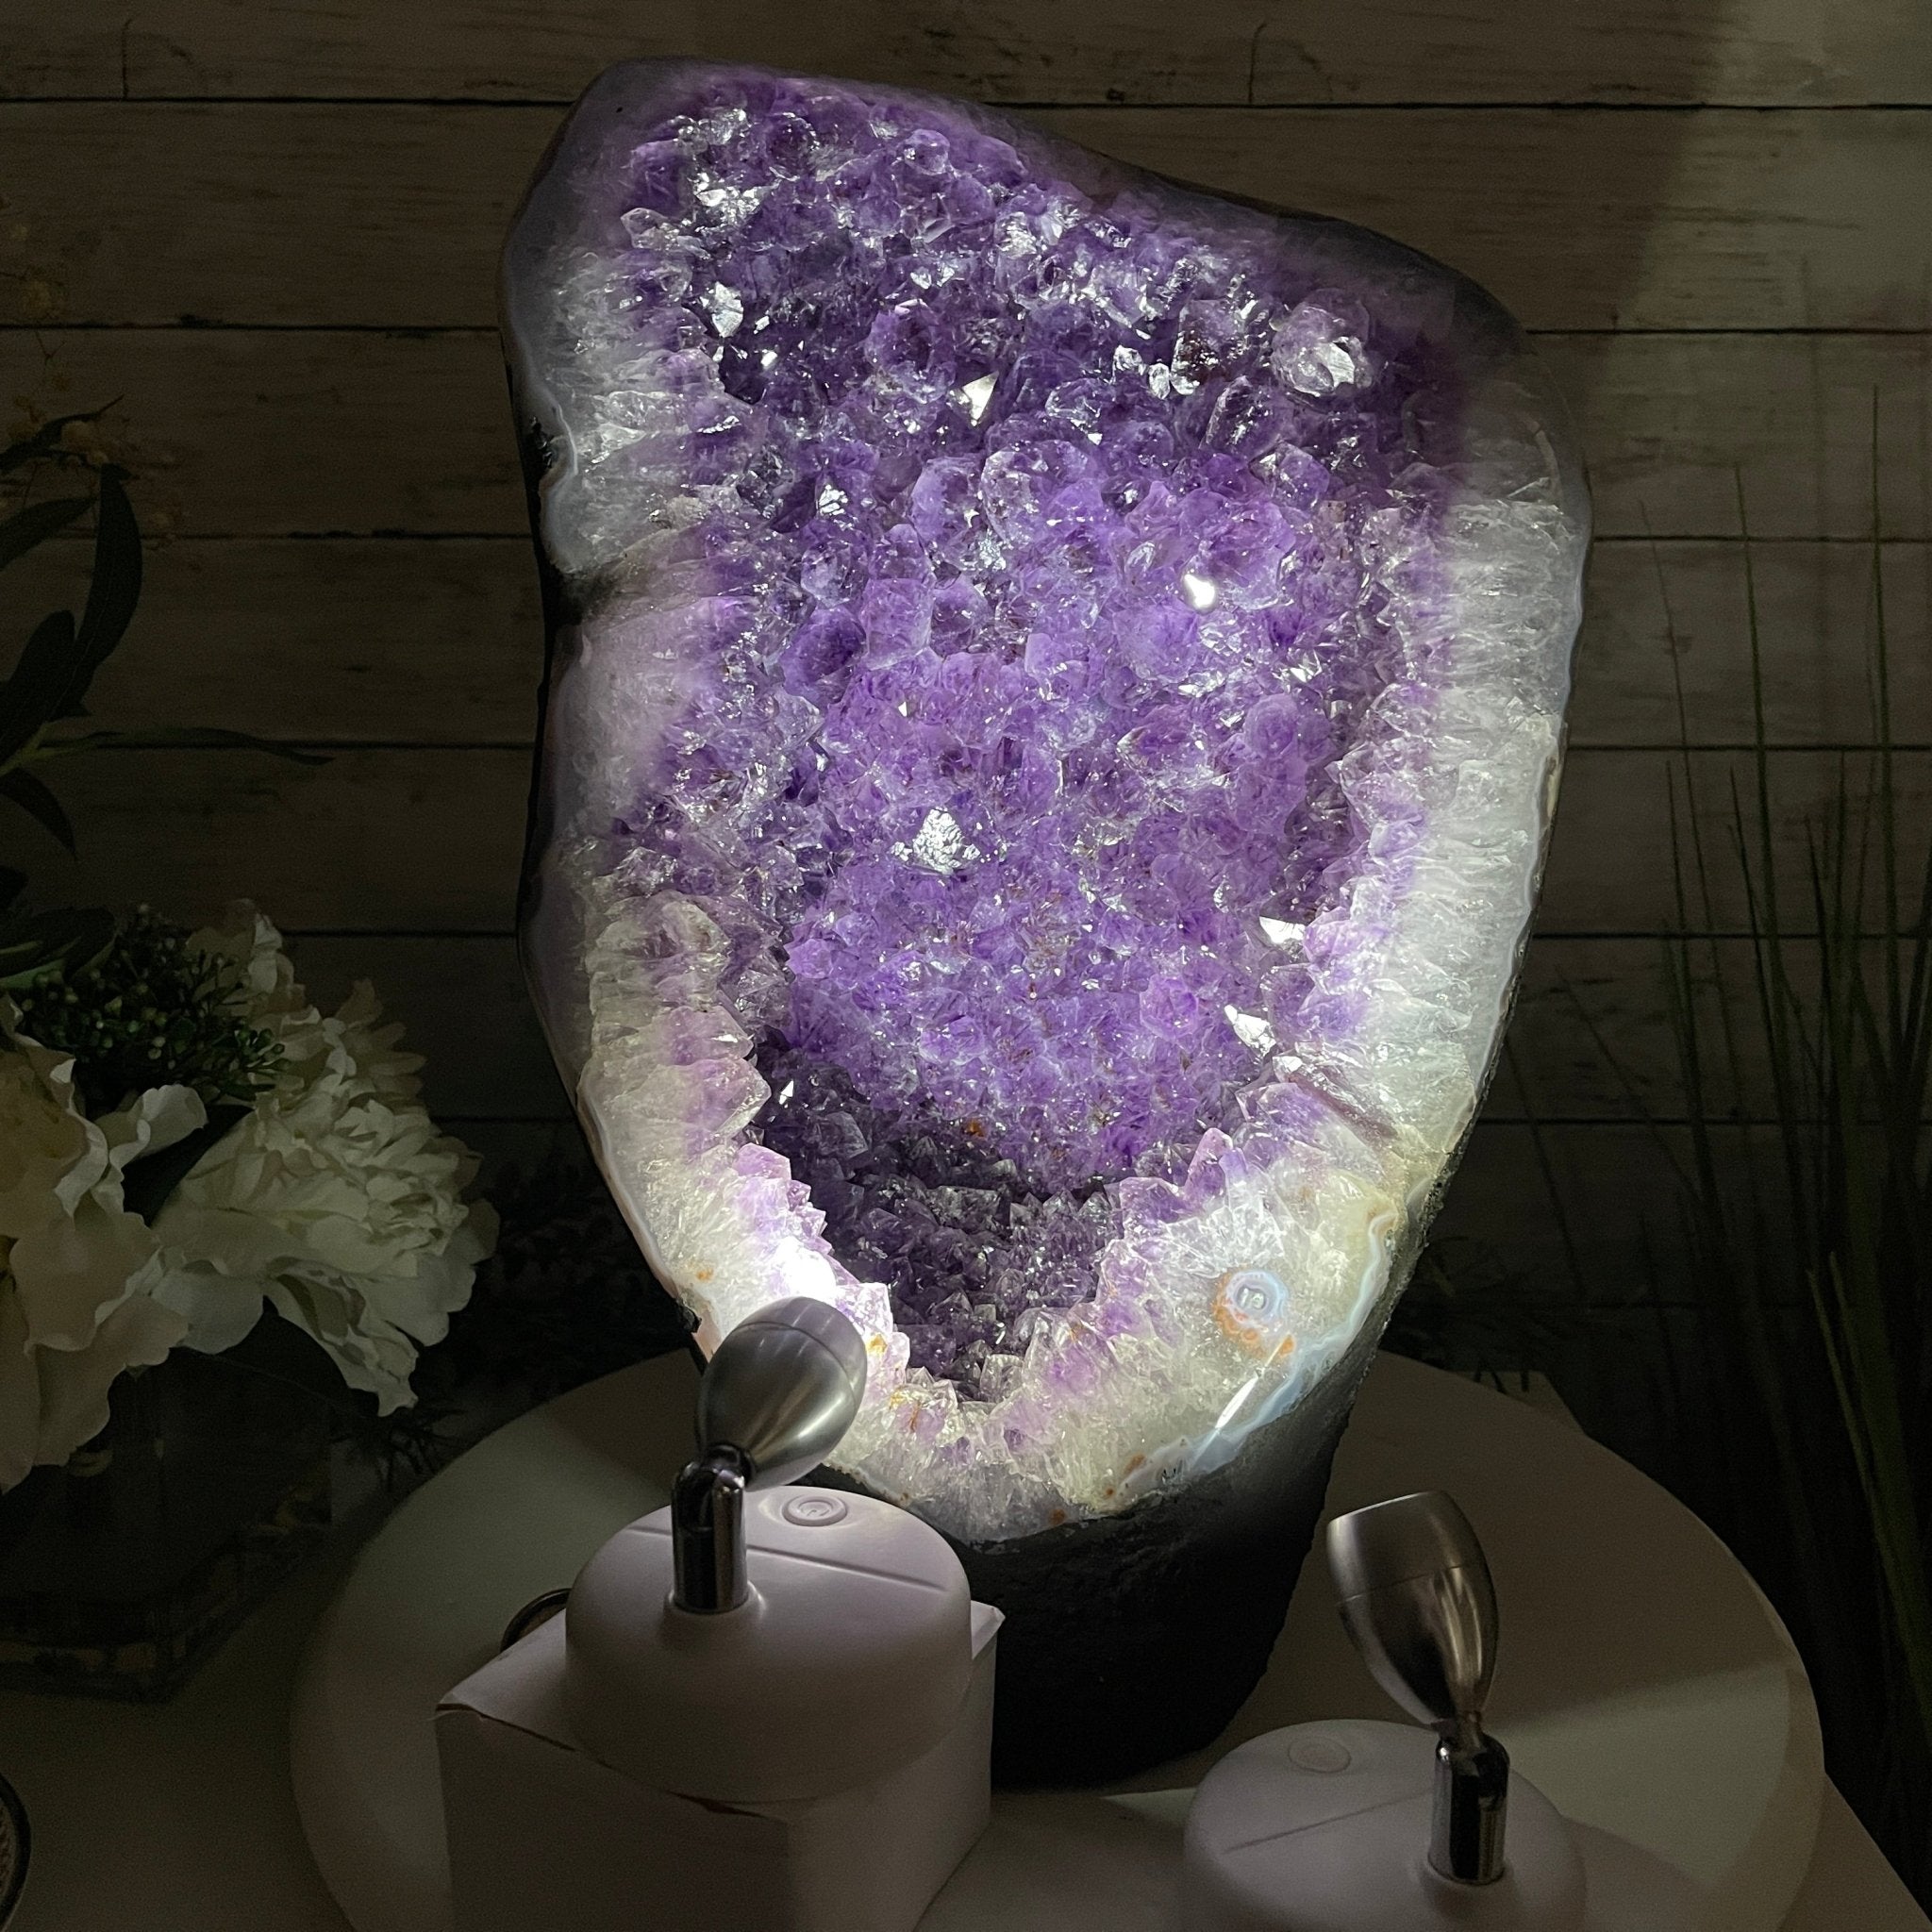 Extra Quality Amethyst Druse Cluster on Cement Base, 34.8 lbs and 14.75" Tall #5614-0031 - Brazil GemsBrazil GemsExtra Quality Amethyst Druse Cluster on Cement Base, 34.8 lbs and 14.75" Tall #5614-0031Clusters on Cement Bases5614-0031